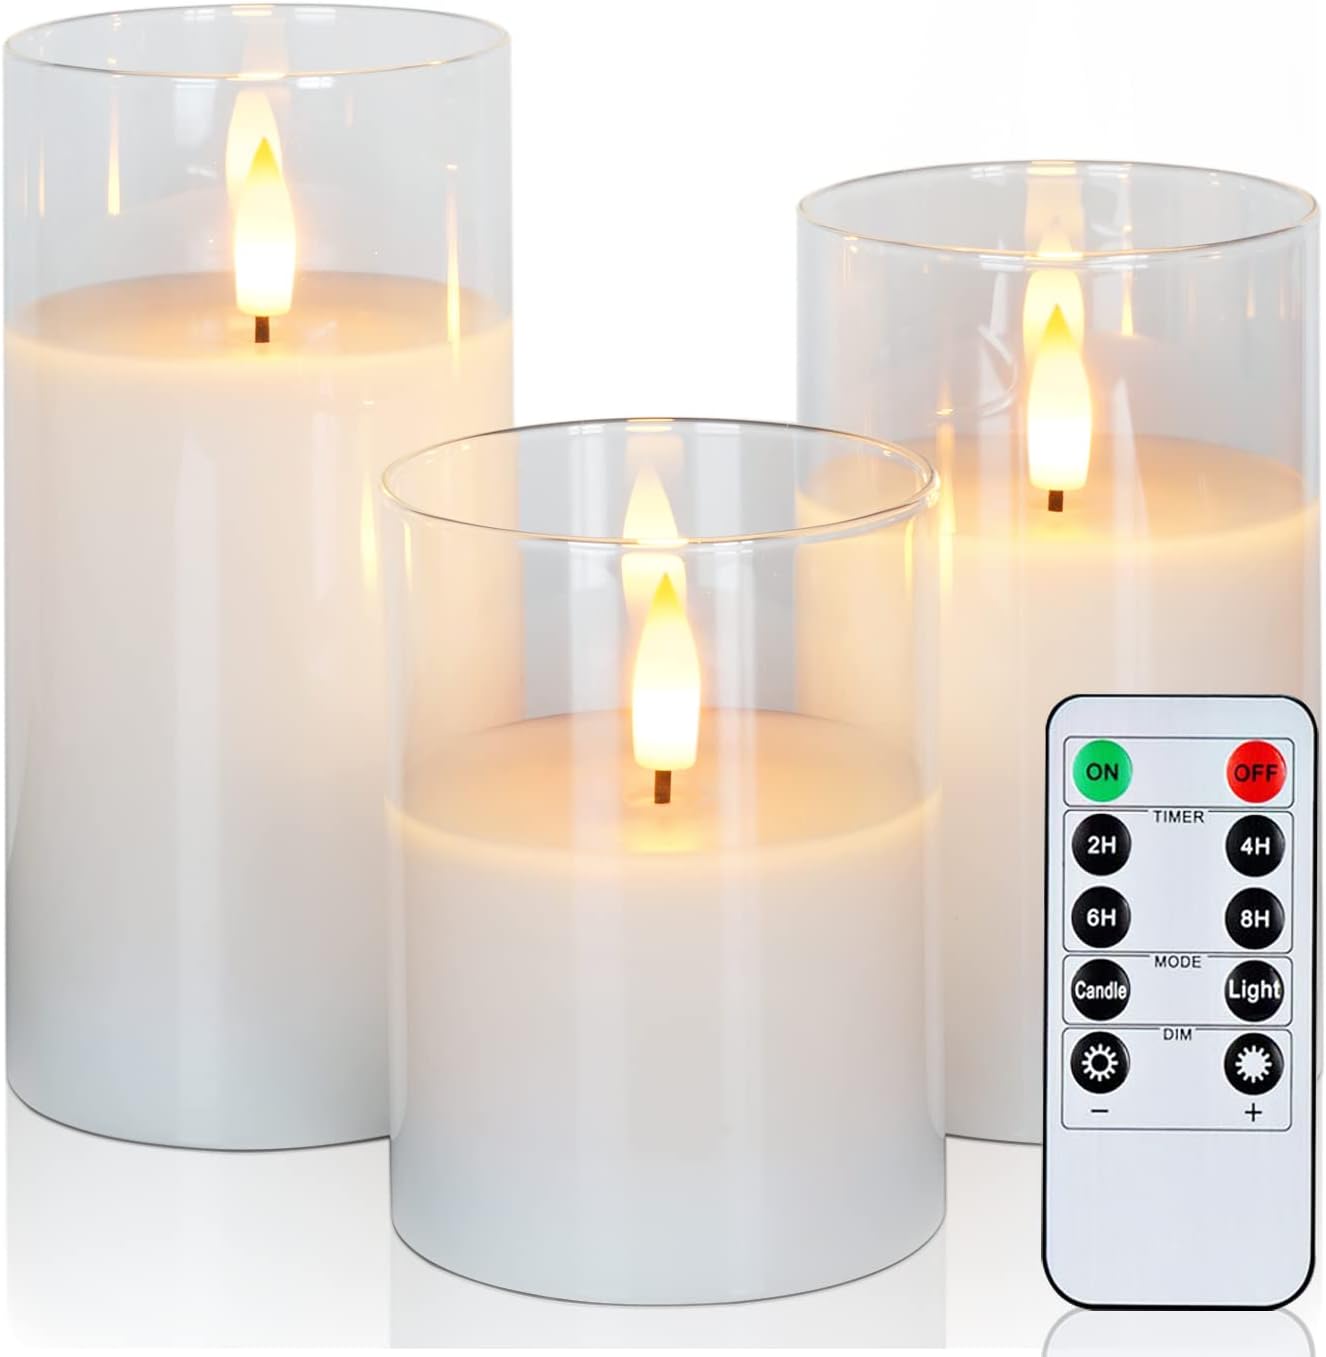 Save 10% on Amagic Clear Glass Flameless Candles - Hurry!